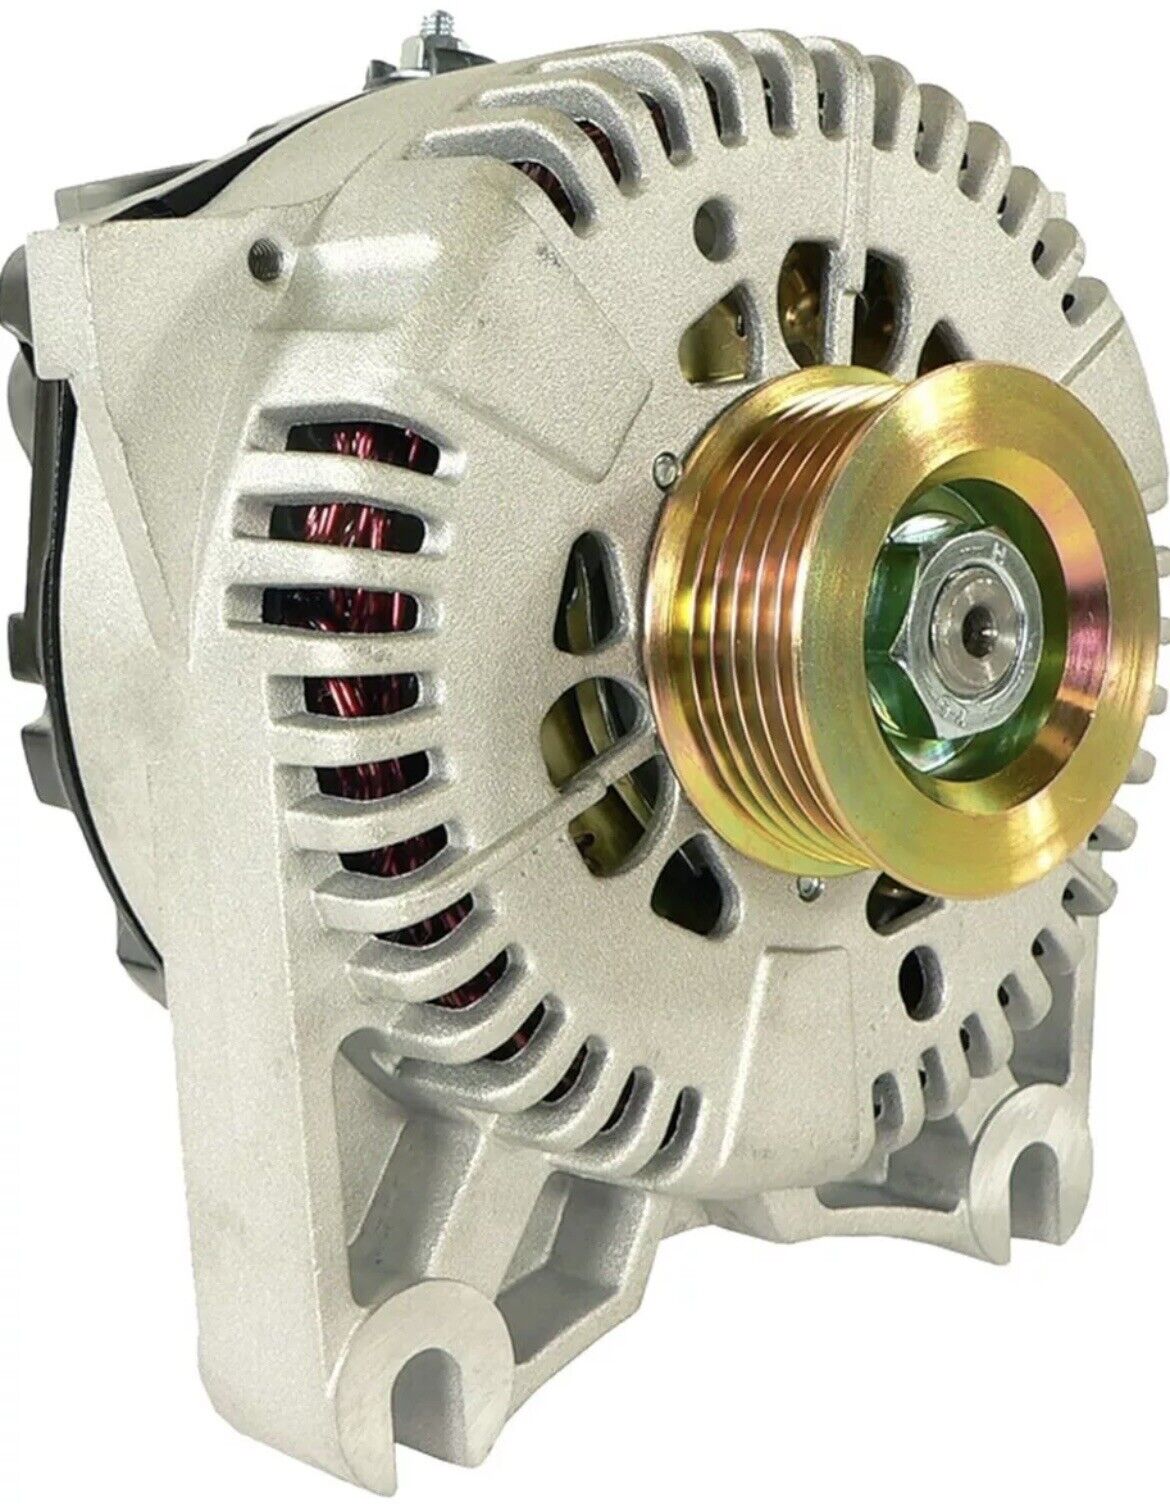 Alternator For 4.6L Ford Mustang 1996 - 2002 Crown Victoria 1995 - 2000 Car Auto